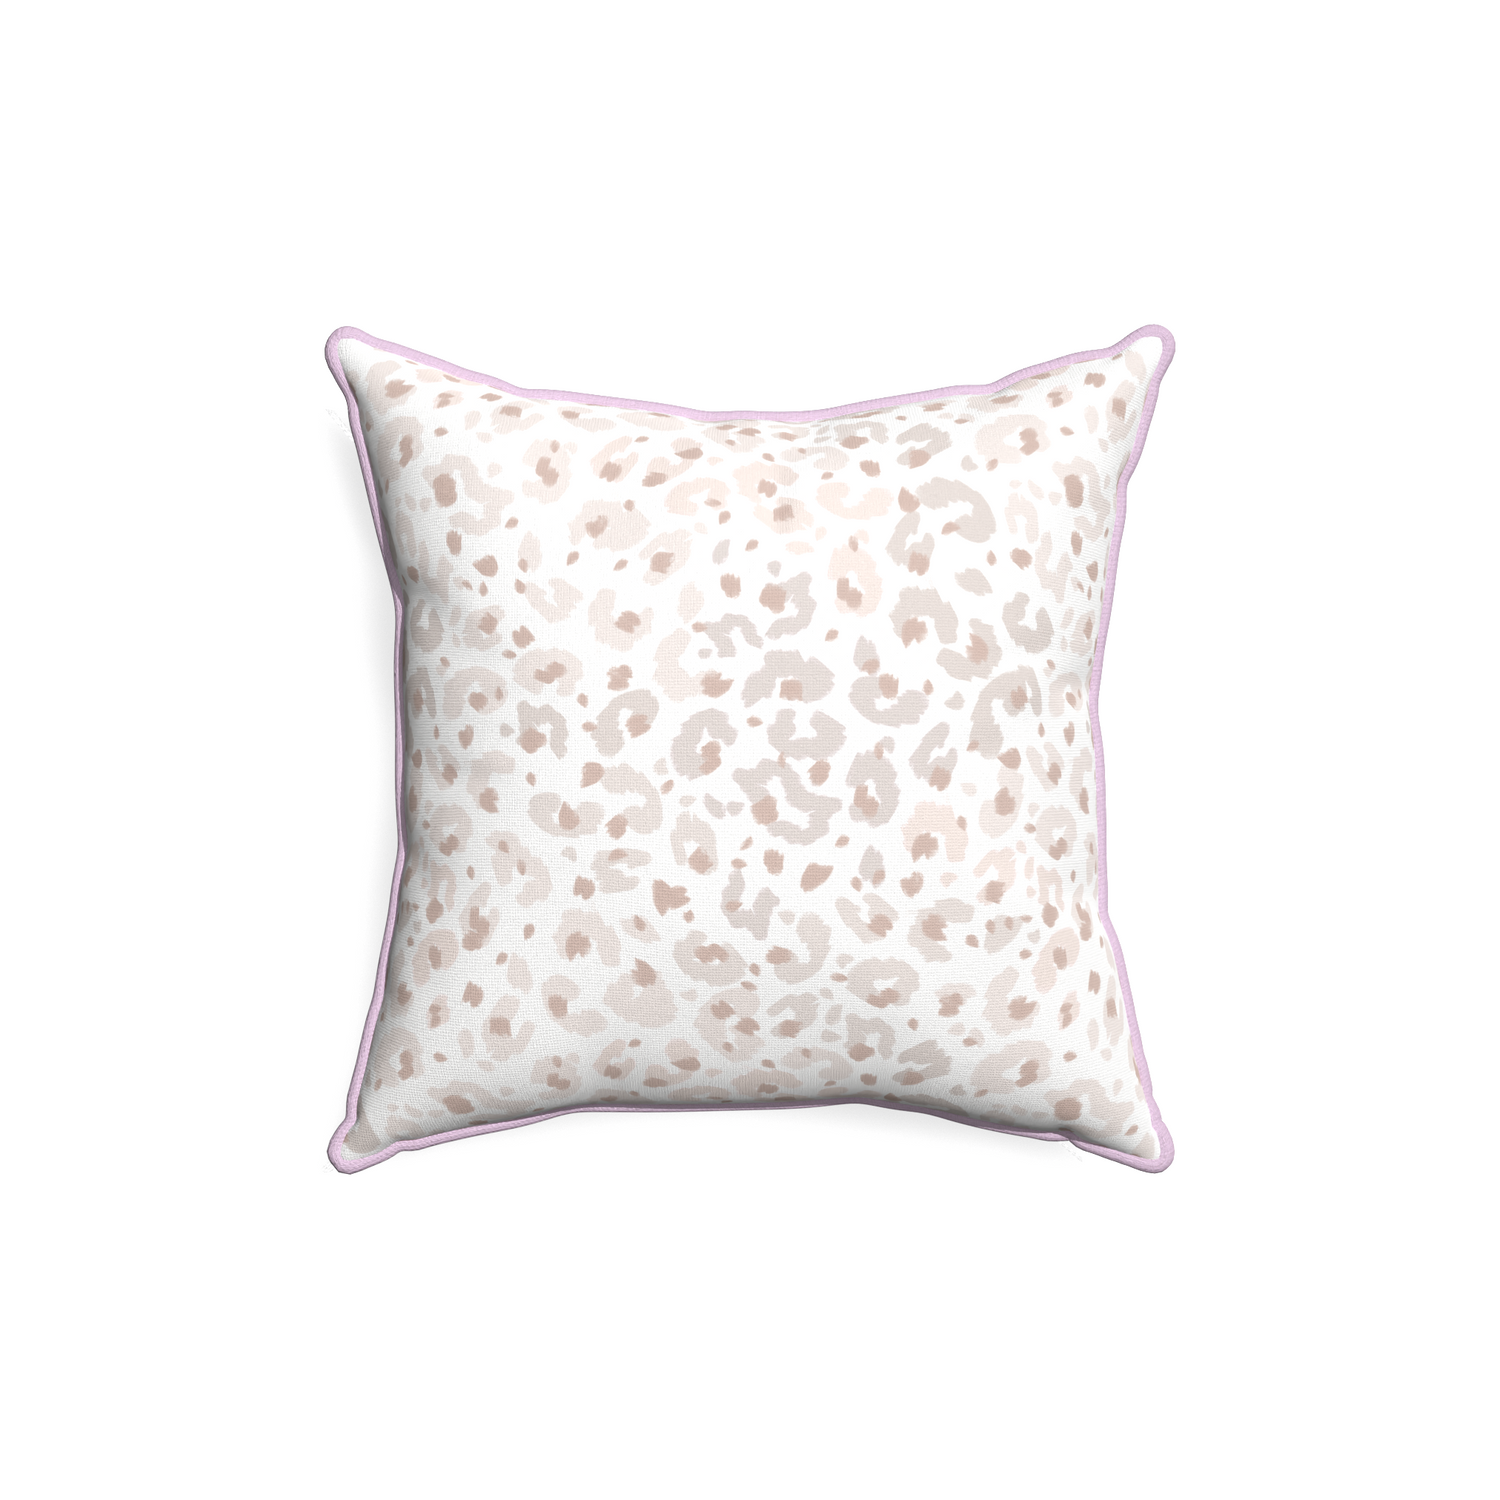 18-square rosie custom pillow with l piping on white background